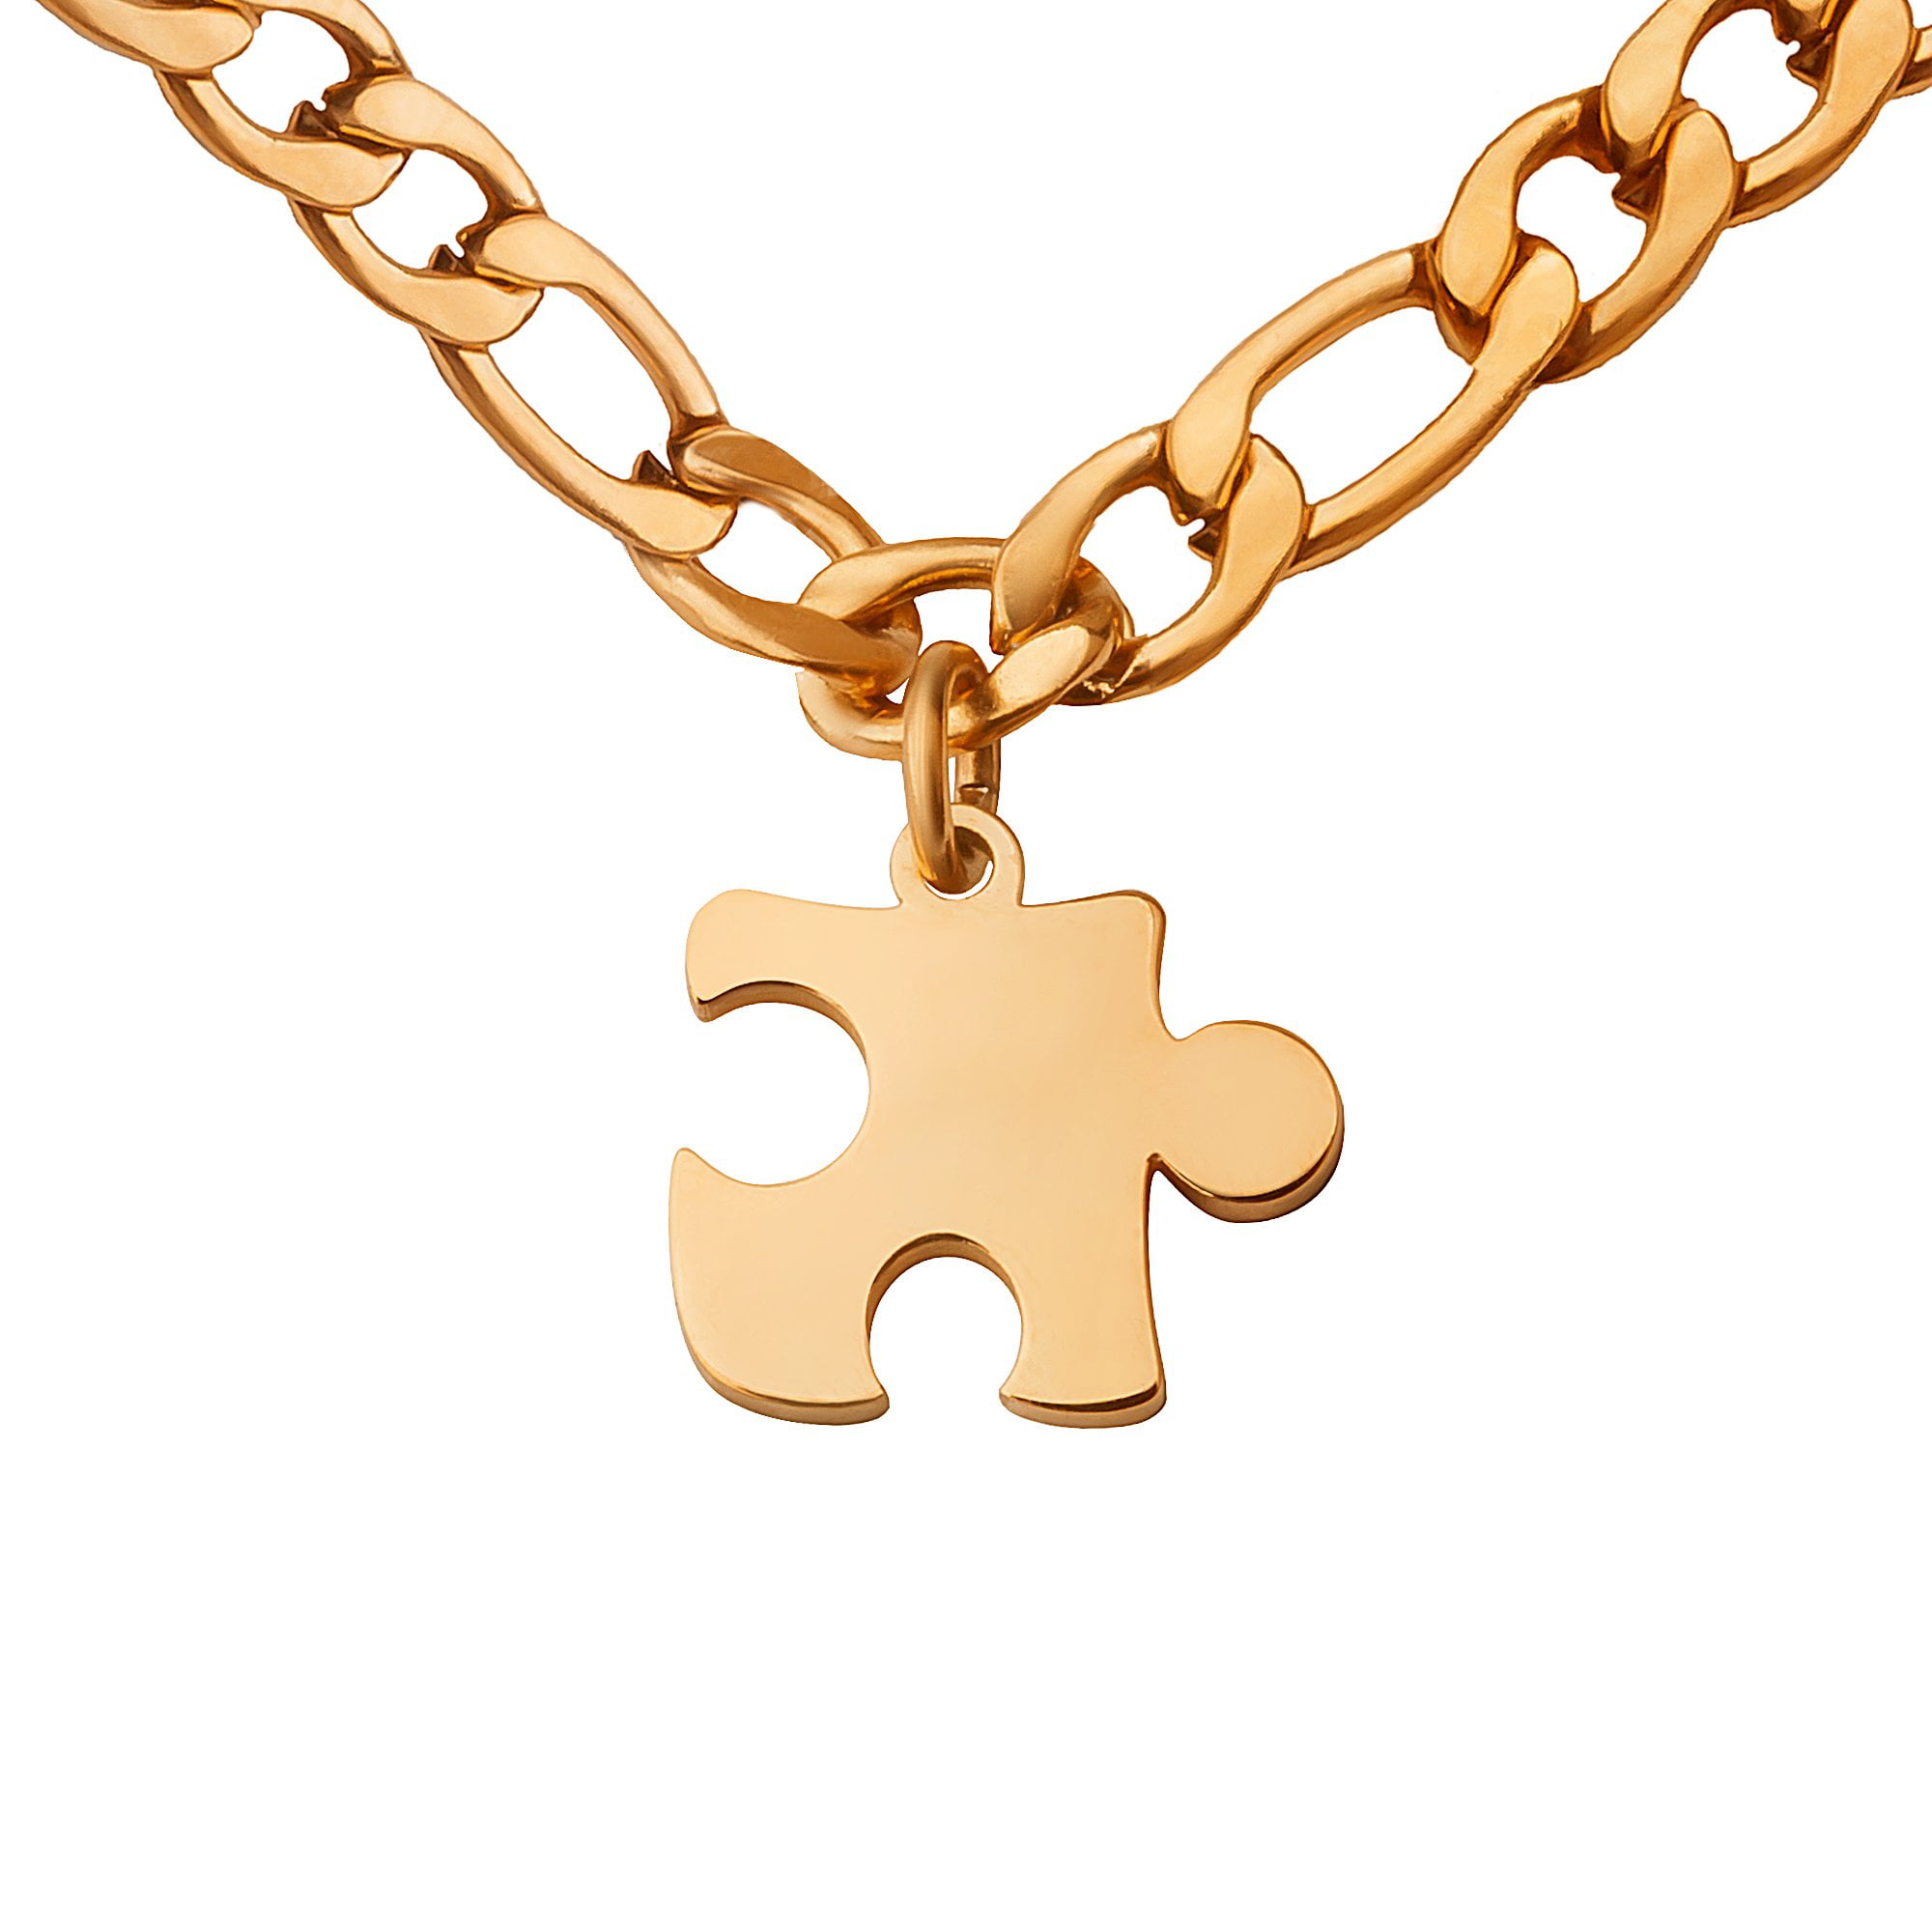 Puzzle Piece Necklace Set for Couples in Sterling Silver